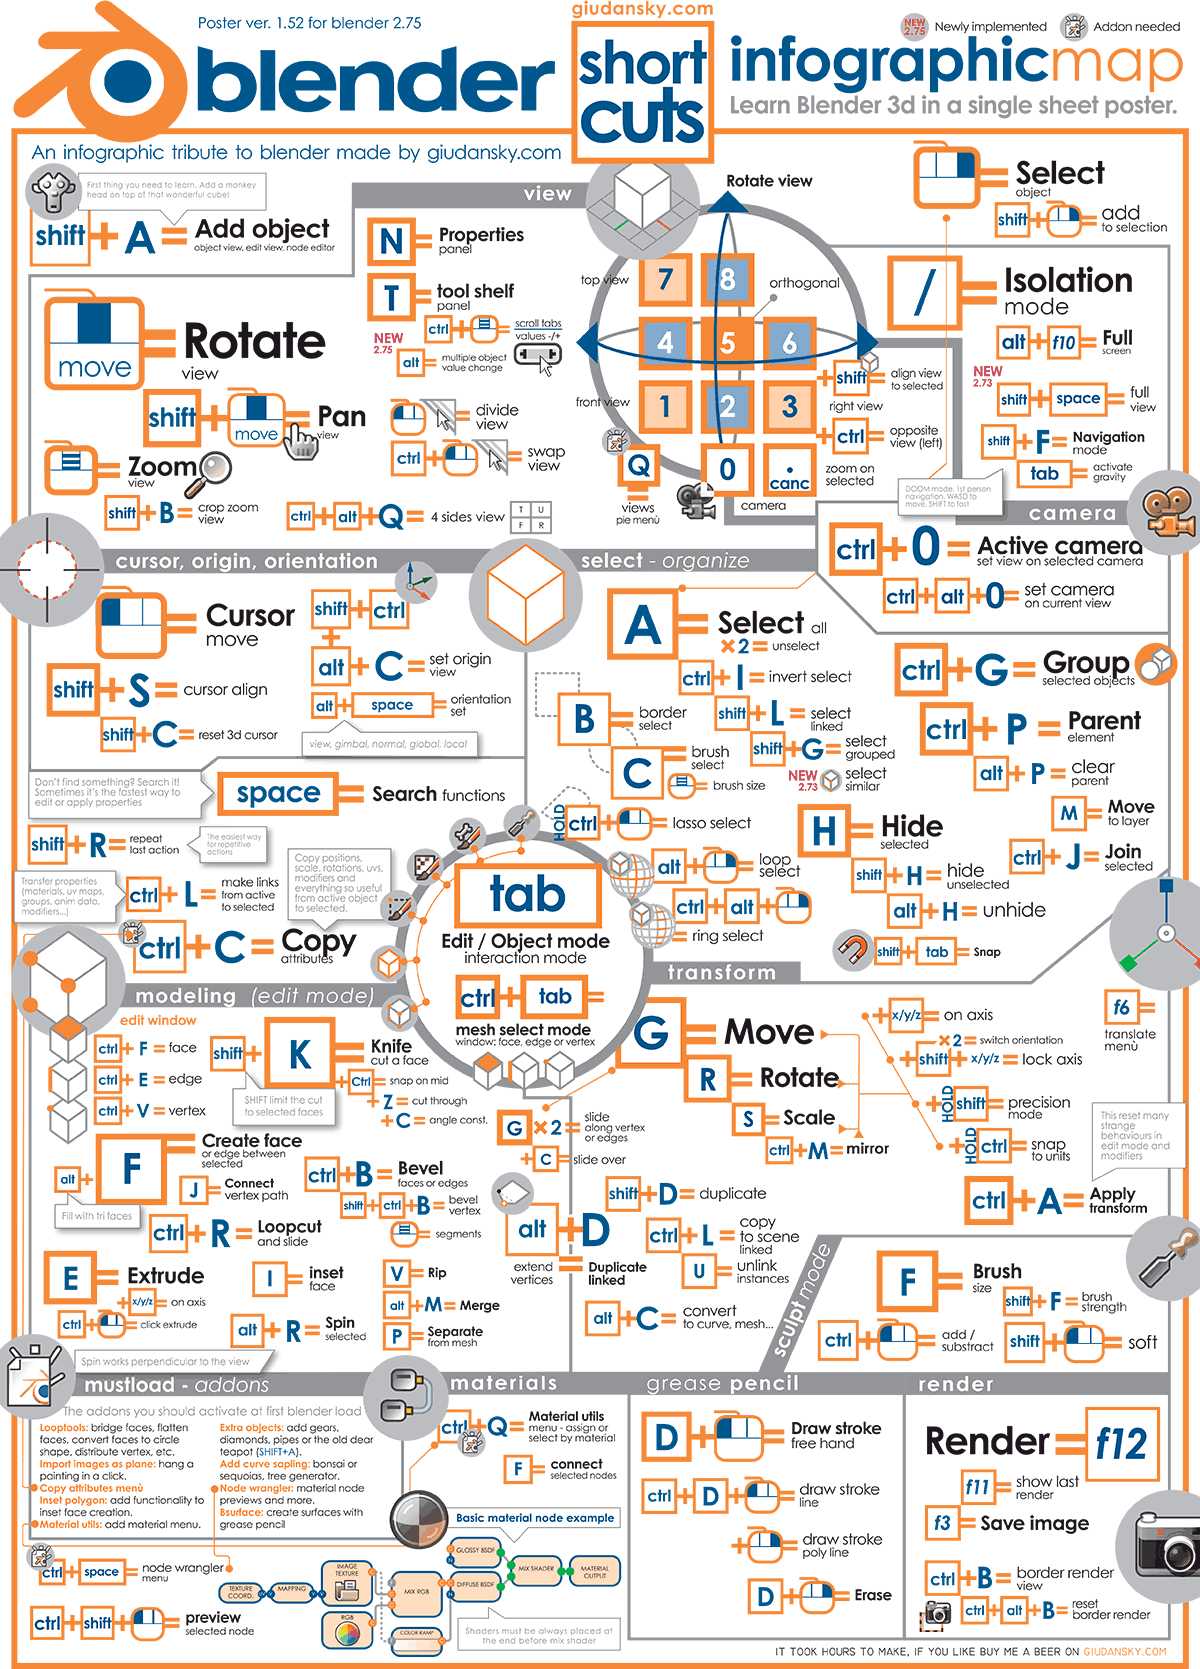 Learn Blender with a poster infographic